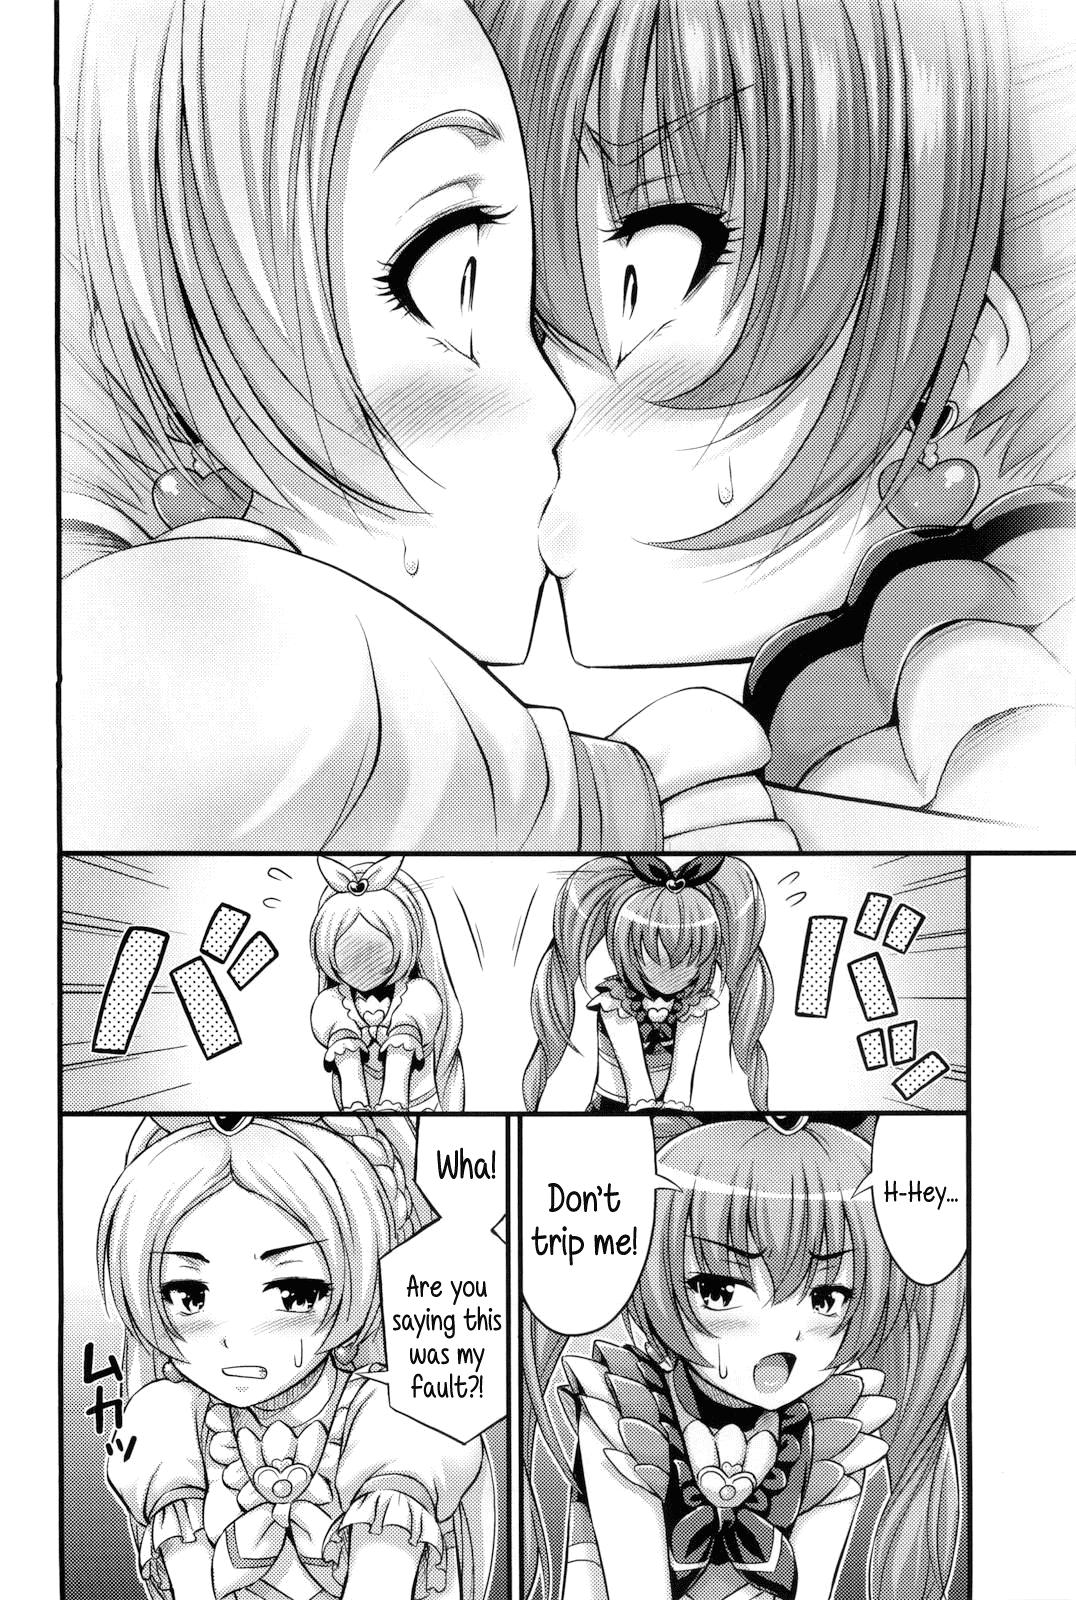 Tiny Girl HP ga Tarinai | Our HP is lacking - Suite precure Gay Straight - Page 3